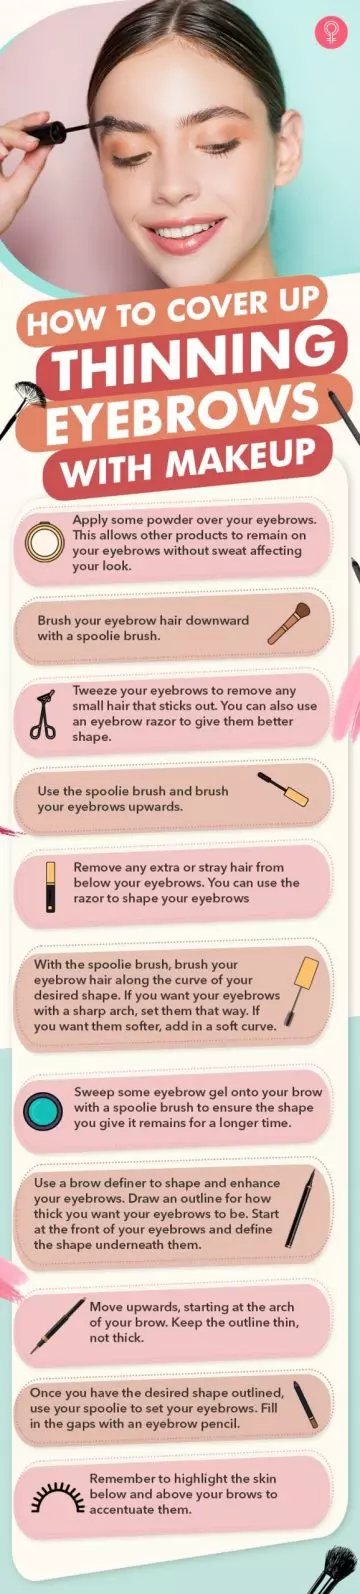 how to cover up thinning eyebrows with makeup (infographic)